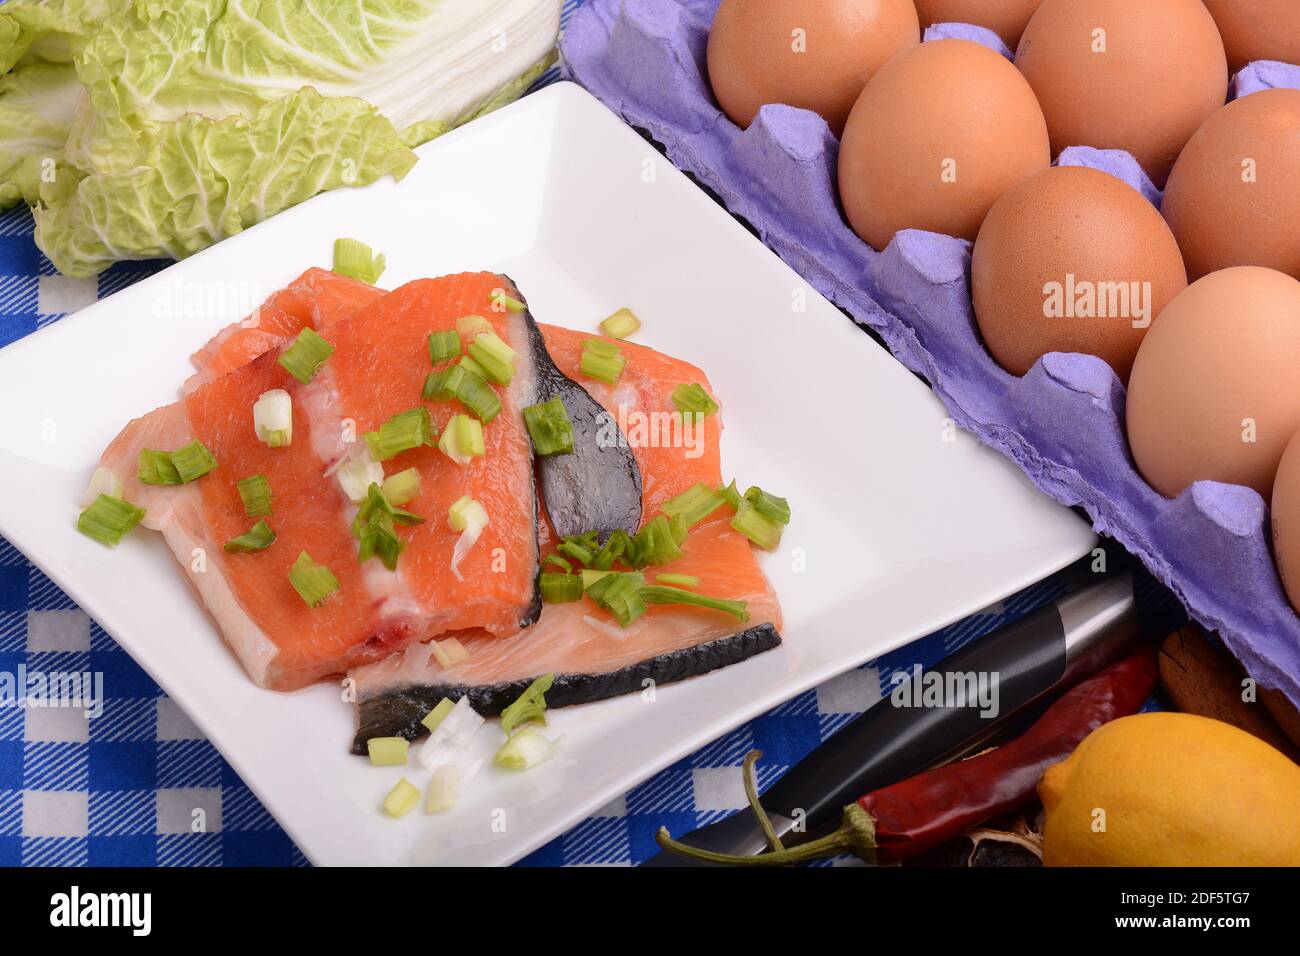 Red salmon fish, fresh eggs and cabbage with red hot chilli pepper with greens. Healthy food cooking. Stock Photo